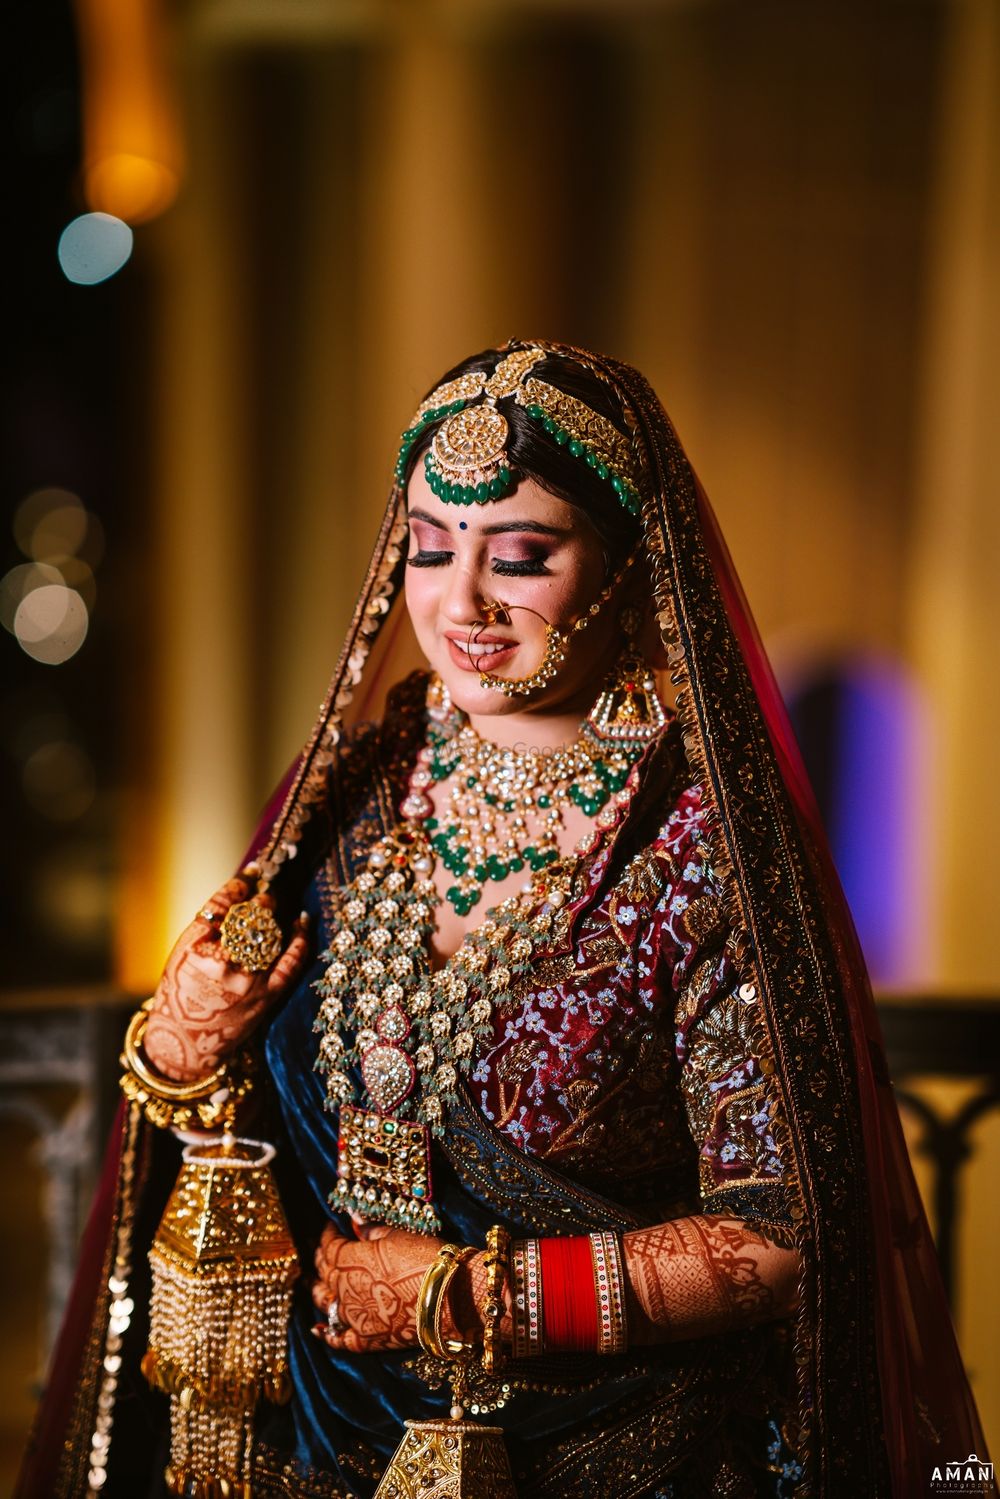 Photo From Bride To be - By Makeup by KanikaS